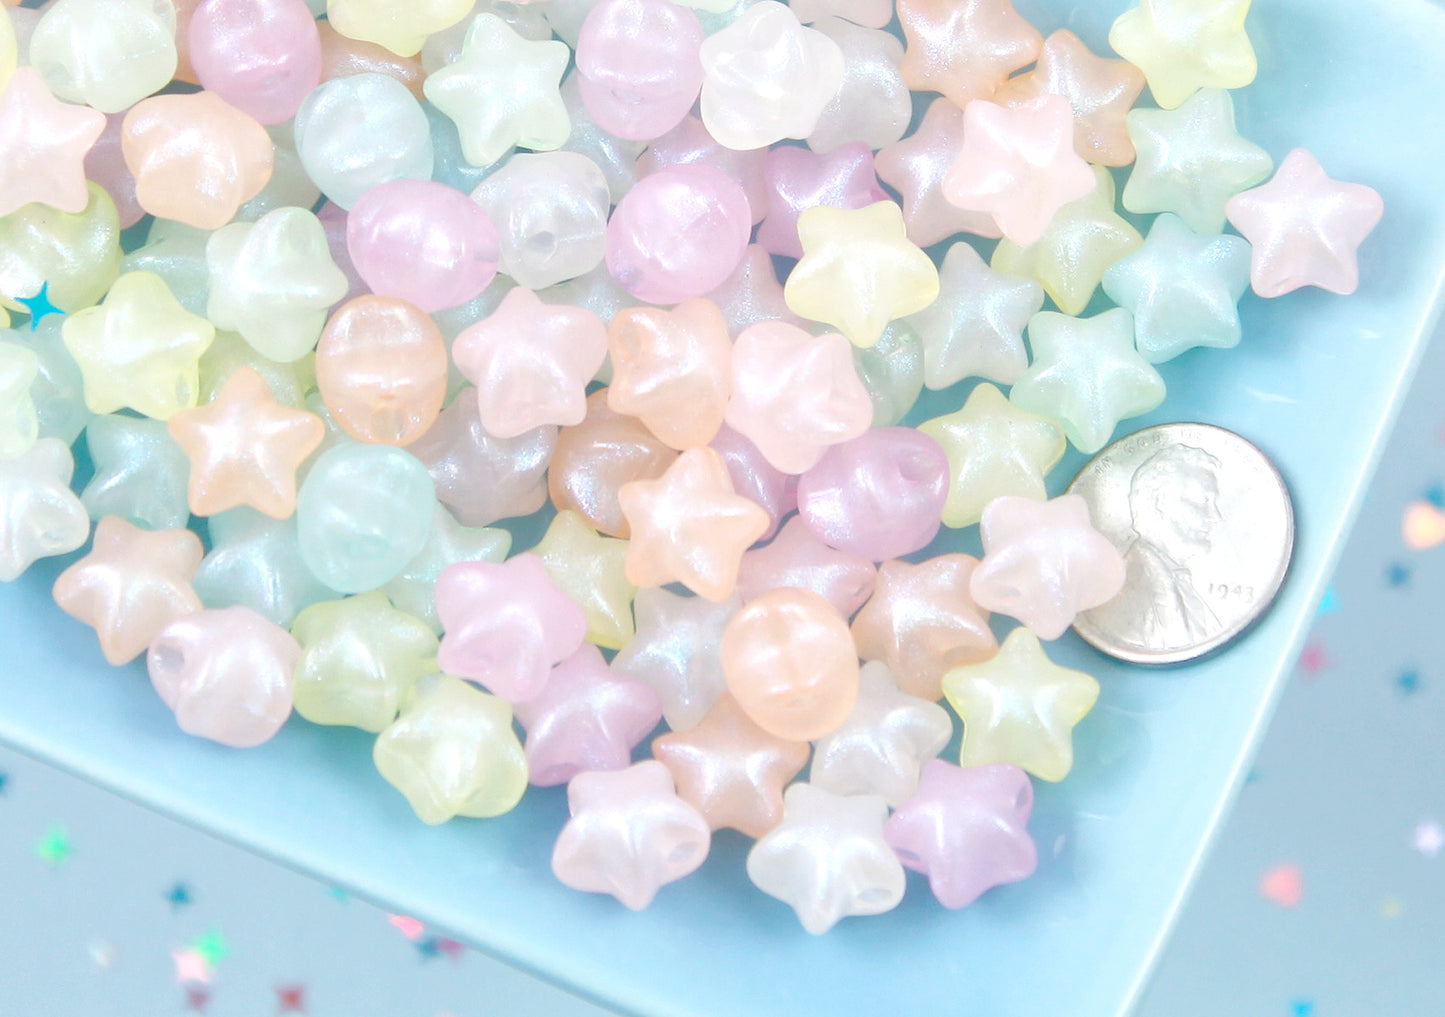 Pastel Star Beads - 11mm Pastel Shimmer 3D Star Acrylic or Resin Beads - 80 pcs set